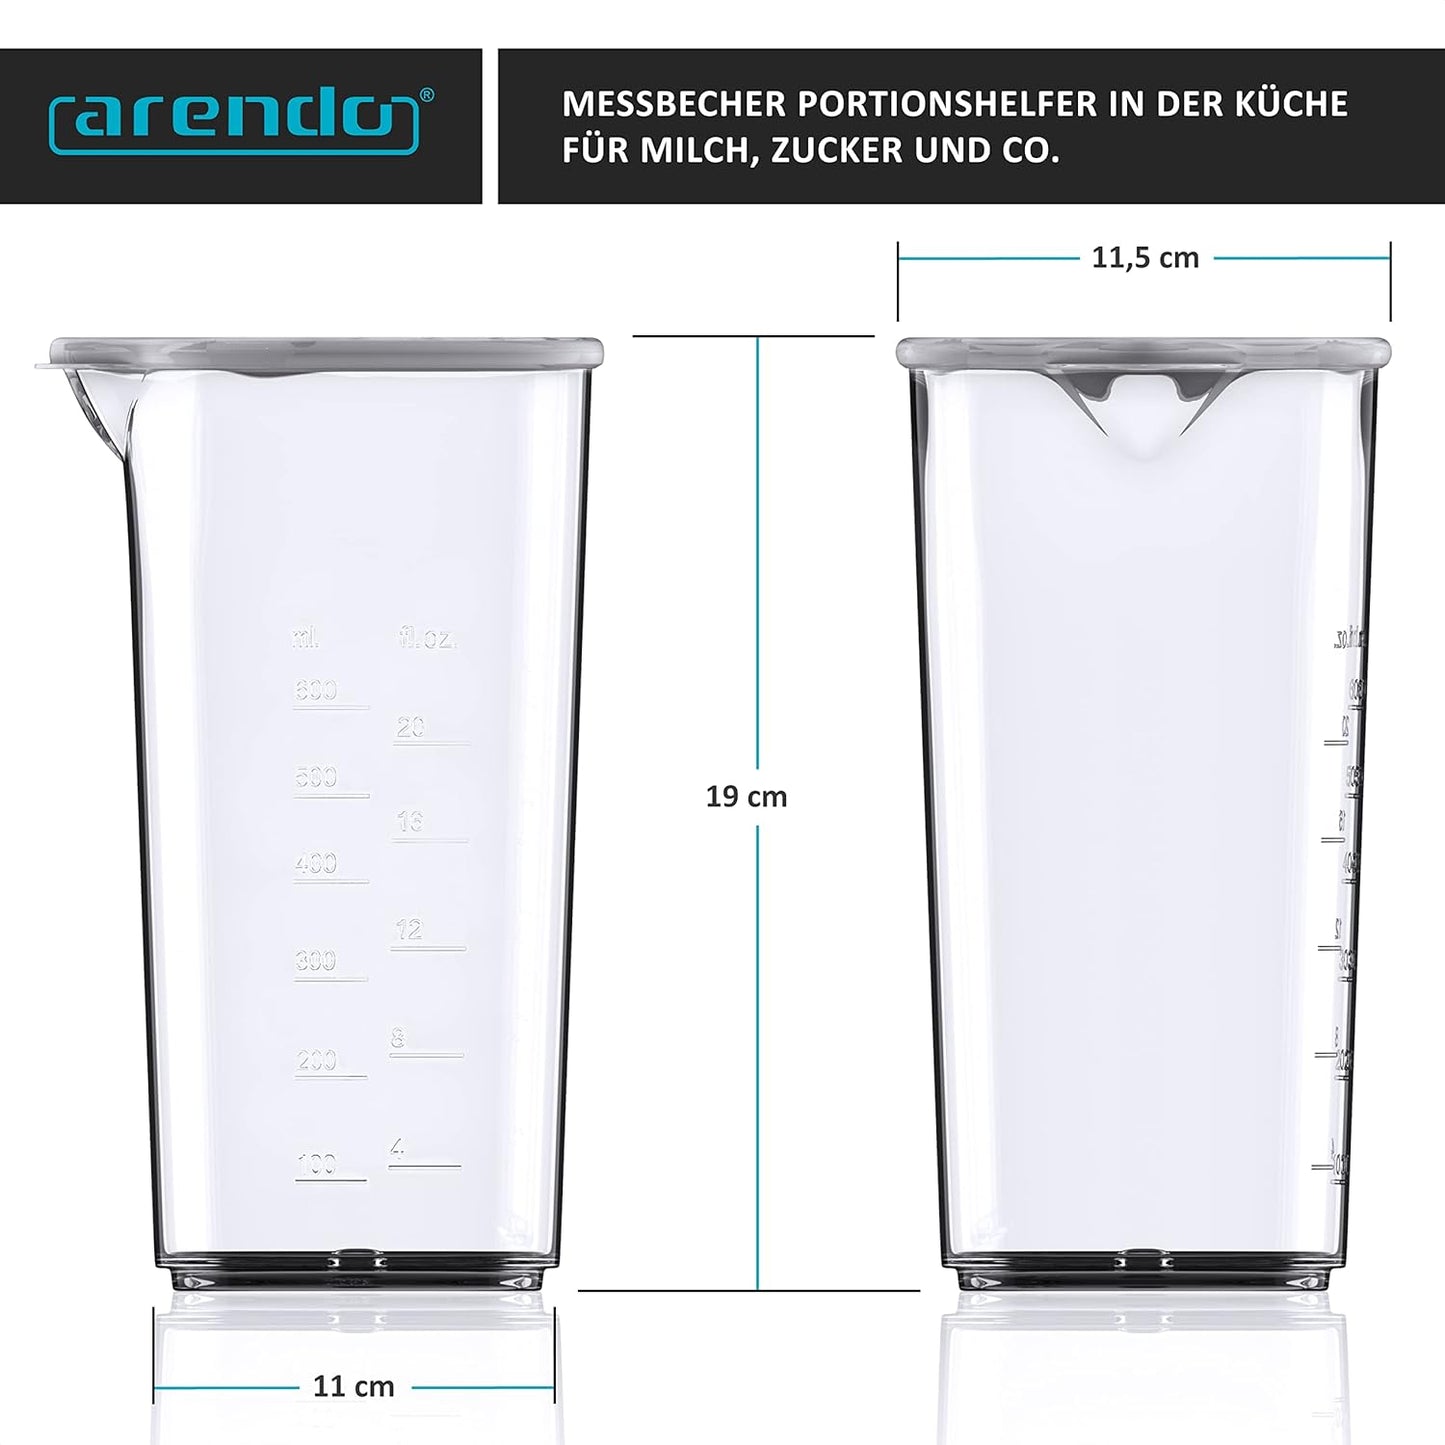 Arendo - Hand blender 1000 watts including measuring cup - four-blade knife - purée rod - continuous control - turbo button - removable mixing base - stainless steel cool grey